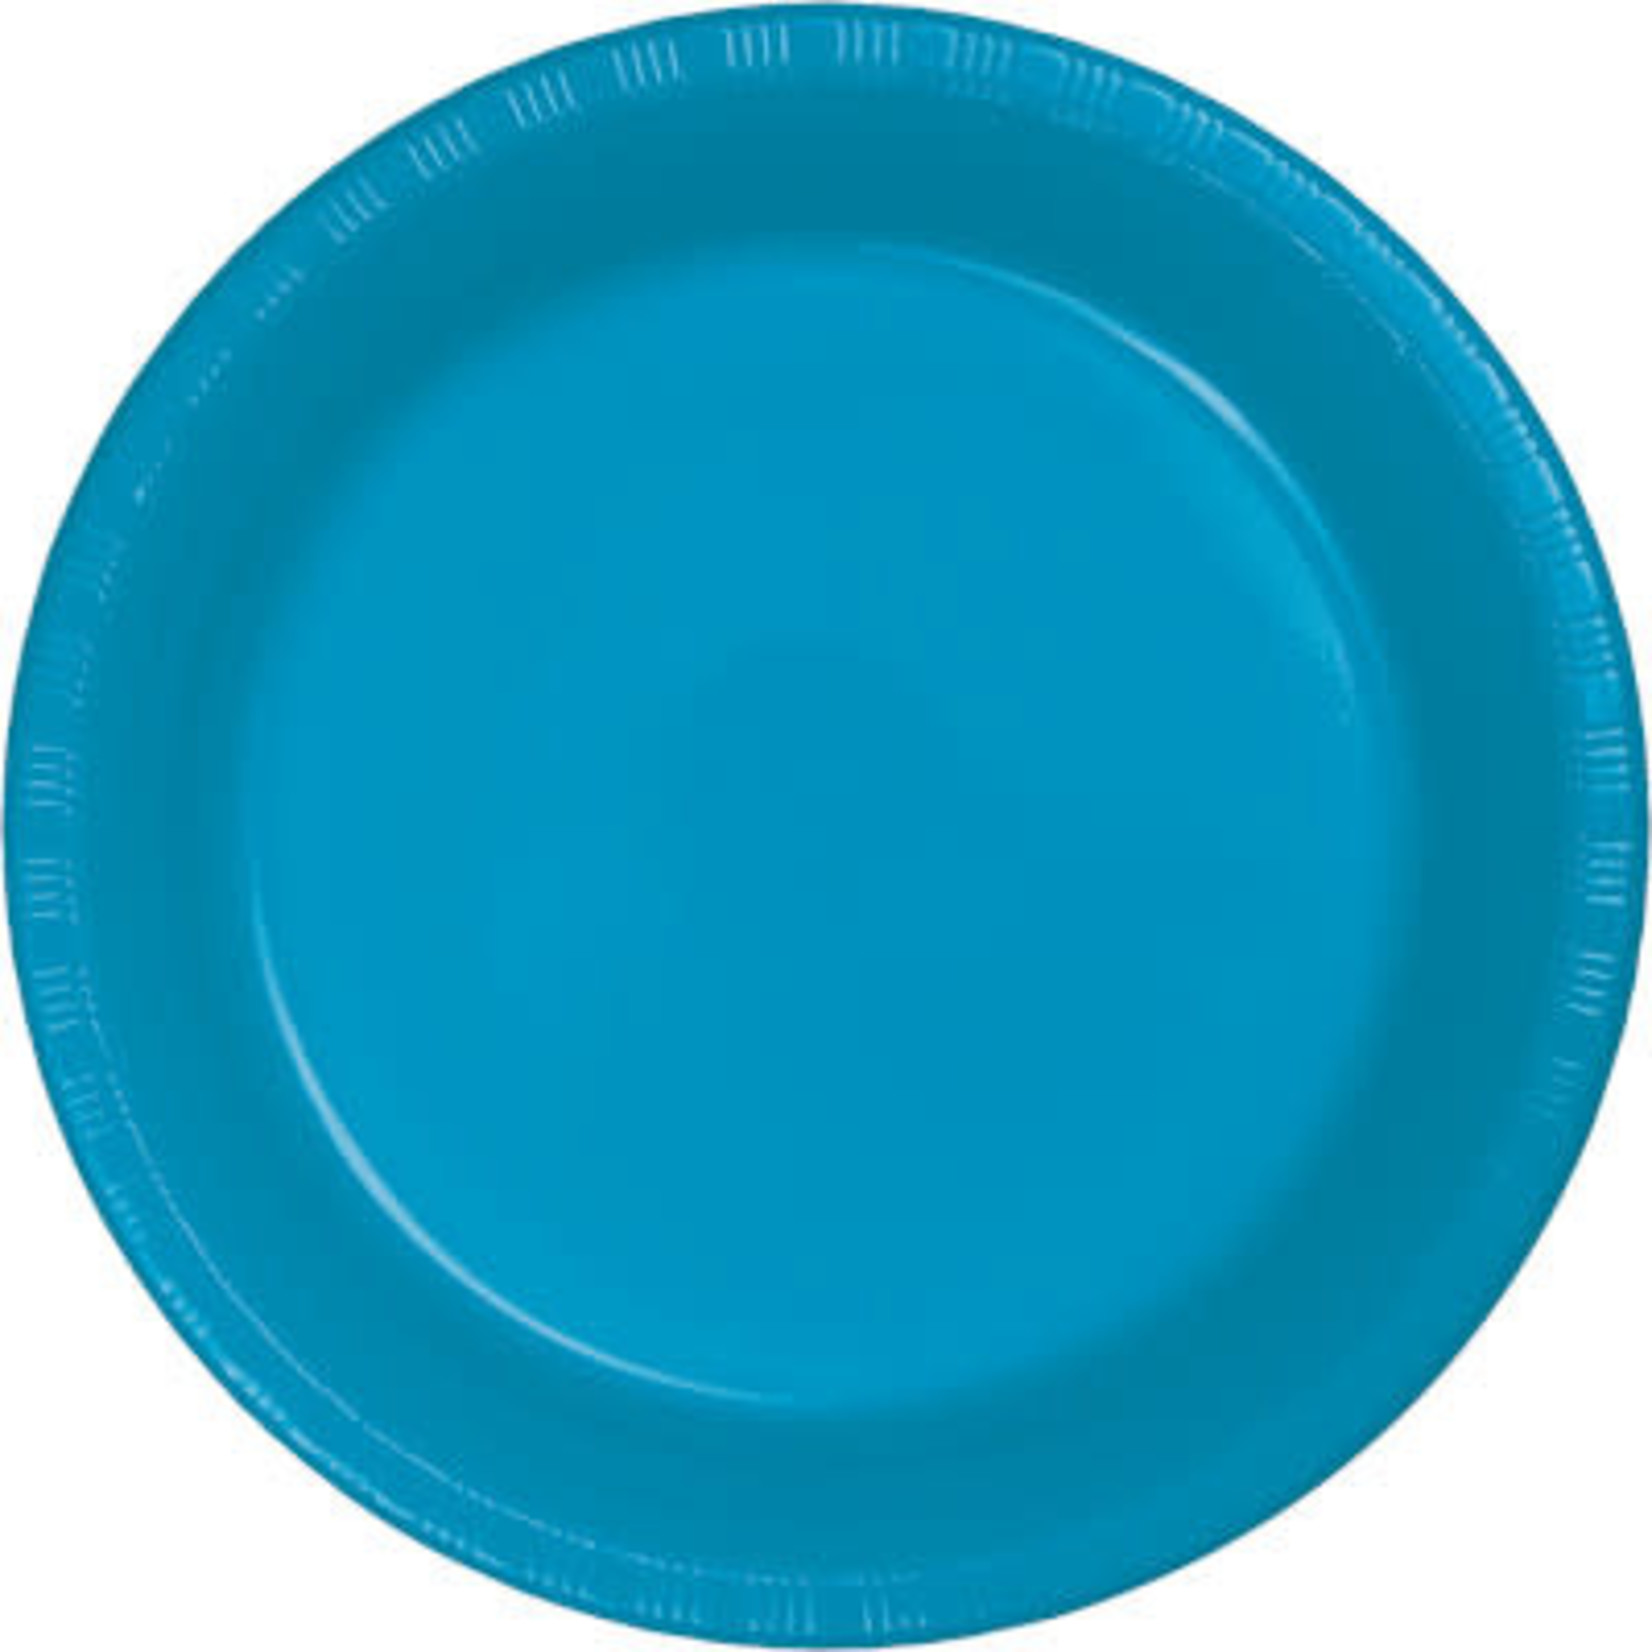 Touch of Color 7" Turquoise Blue Plastic Plates - 20ct.